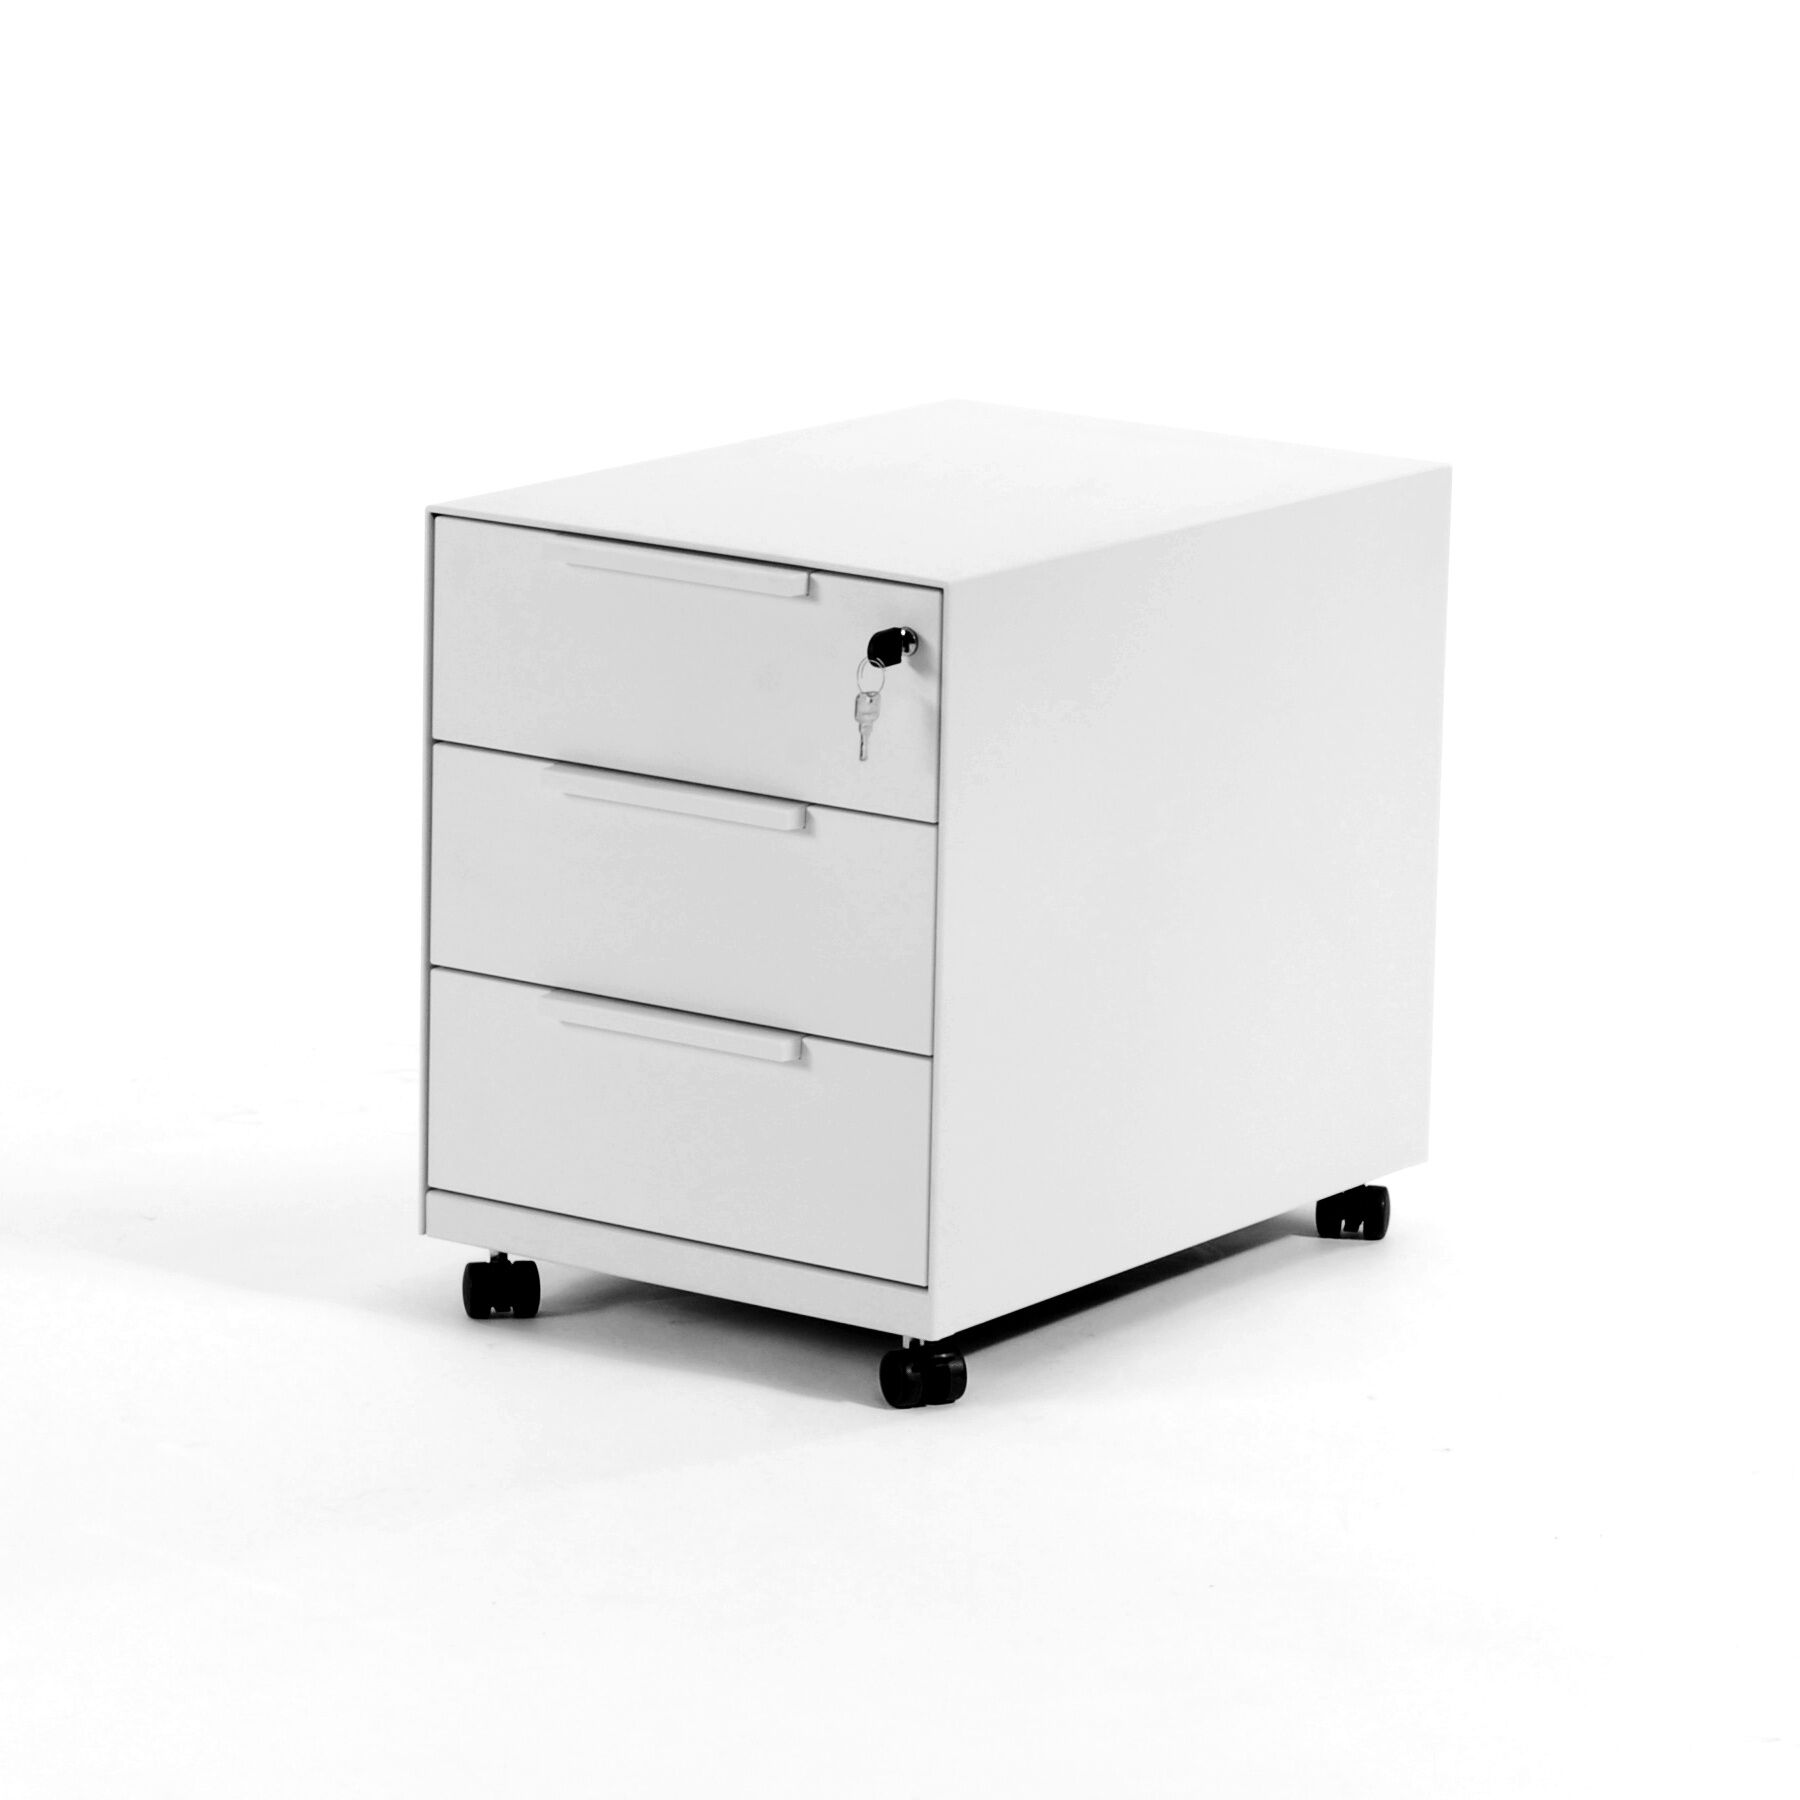 vitra-rollcontainer-mobile-elements-soft-light-weiss-mf-0002536-001-3